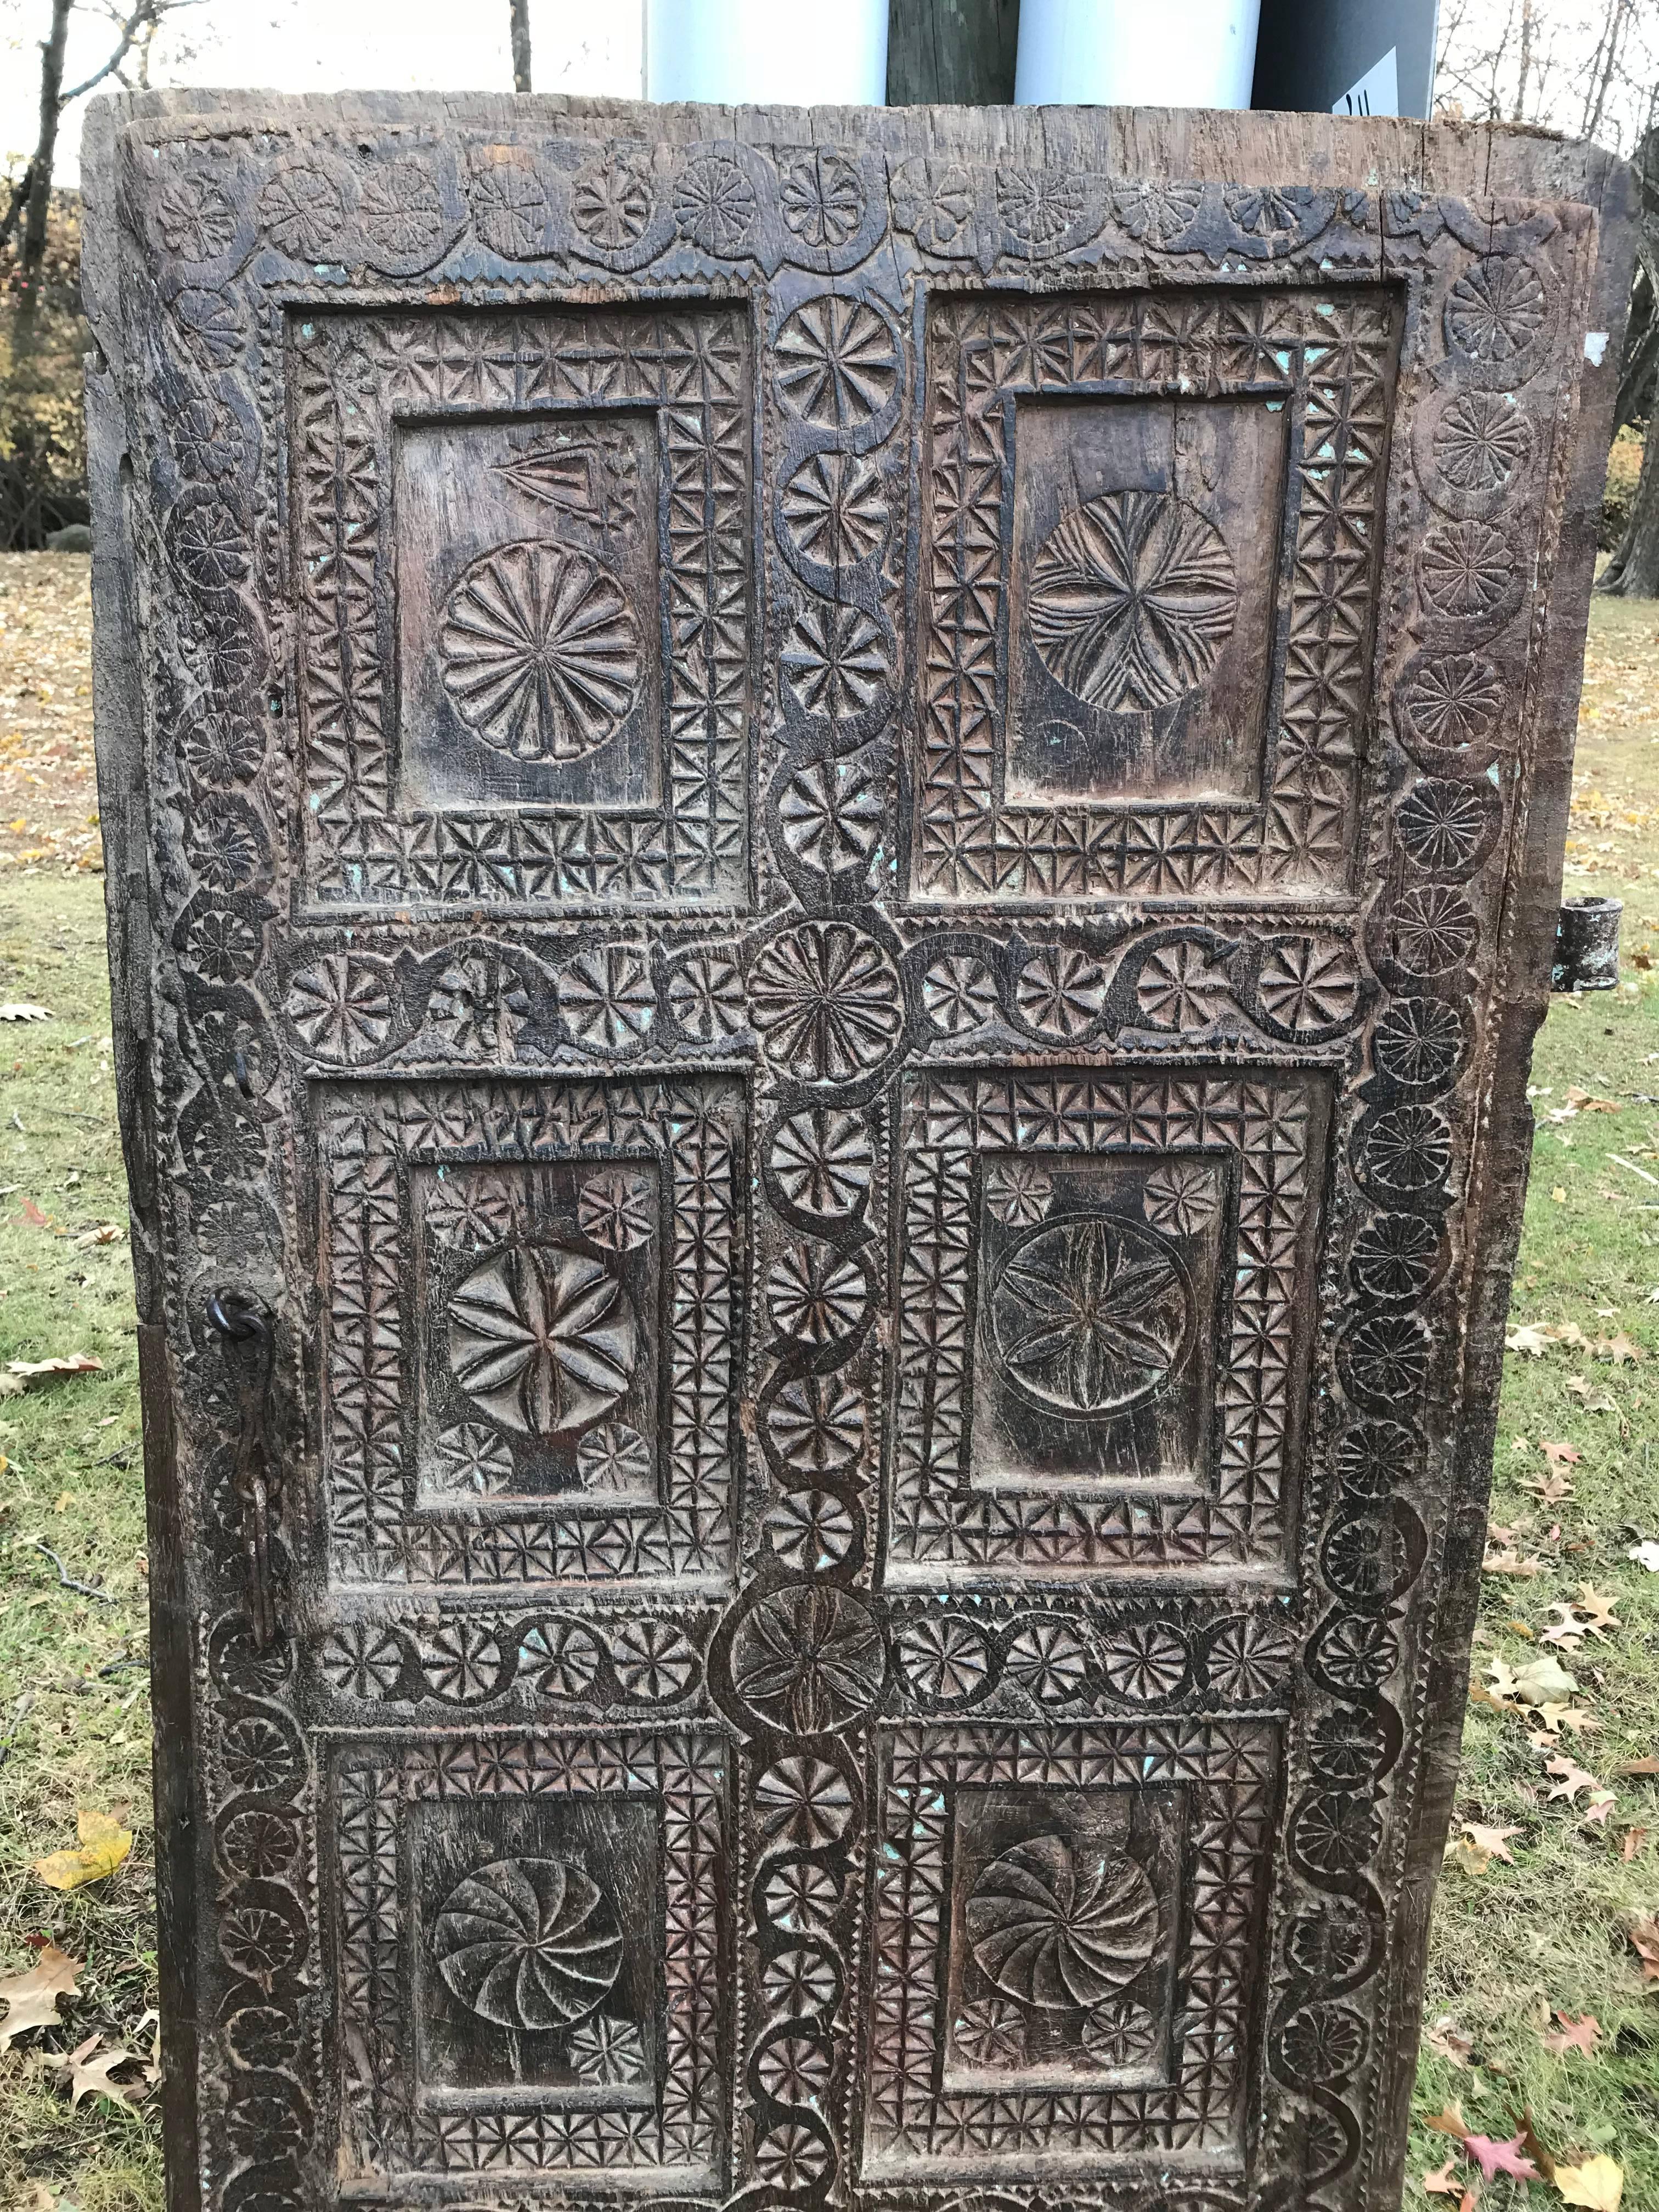 Impressive and finely carved shutter or door with a compelling geometric design. Some traces of blue paint. With wrought iron hinge and hasp, the reverse not carved. More photos coming soon. Can be mounted or hung on a wall. Five feet tall.
60